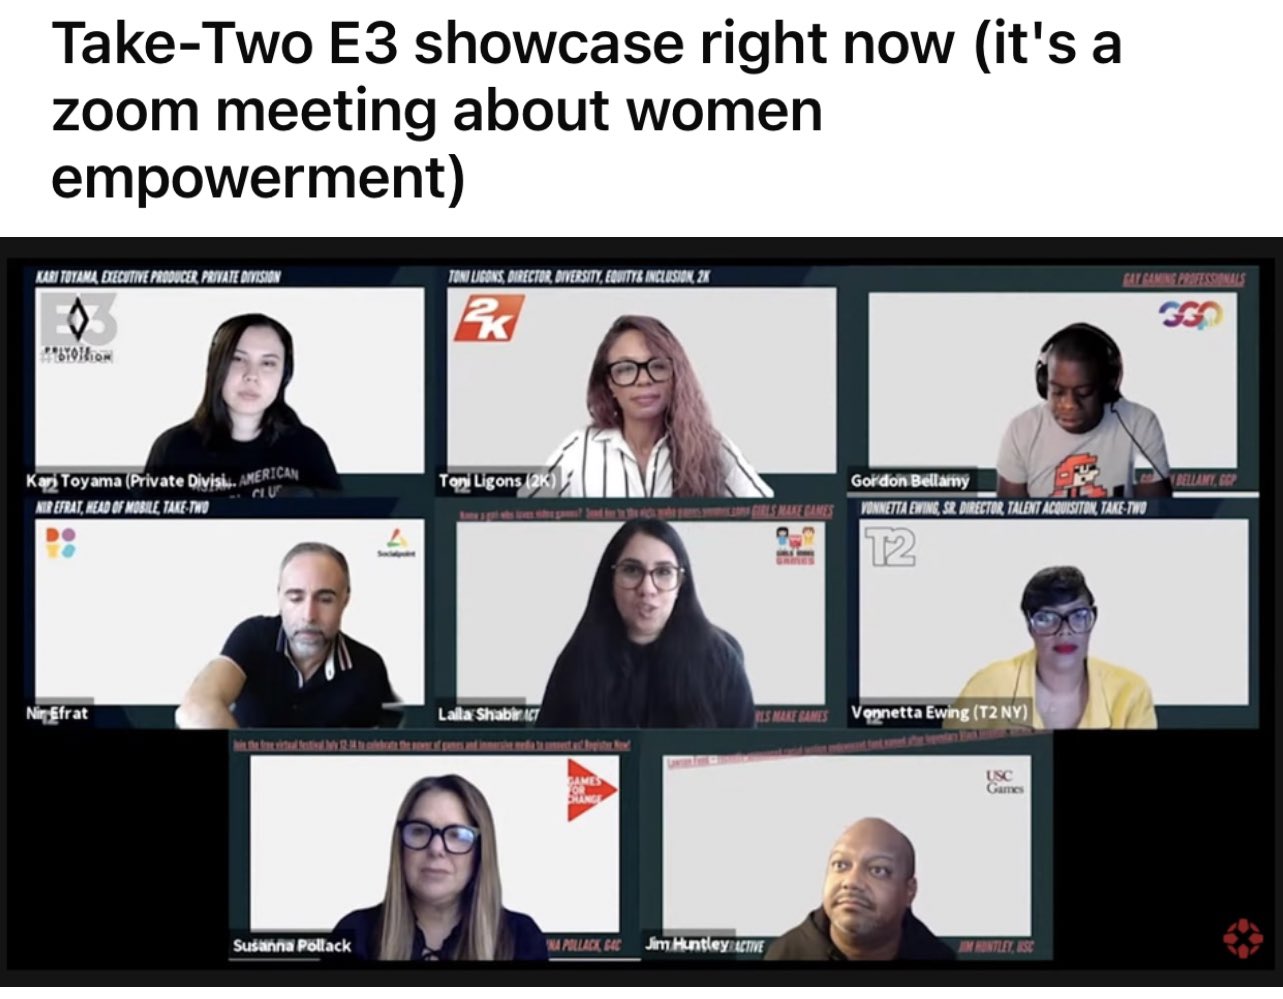 E3 and Next Generation Gaming - Diversity Continues To Be a Tricky Topic